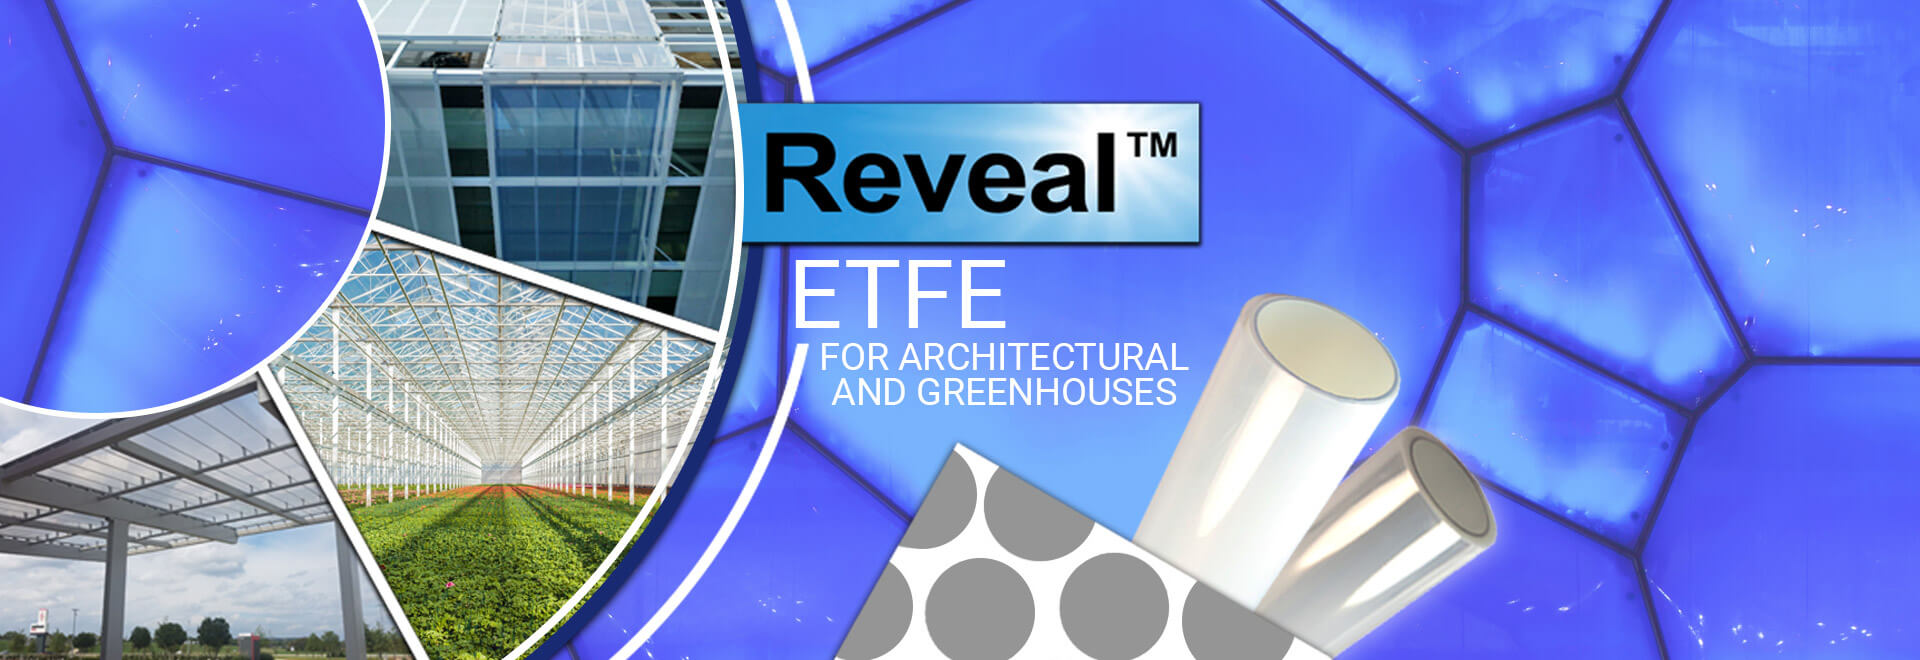 ETFE, etfe film, etfe films, etfe membranes, greenhouse materials, architectural foil, architectural film, high performance film, fluoropolymers